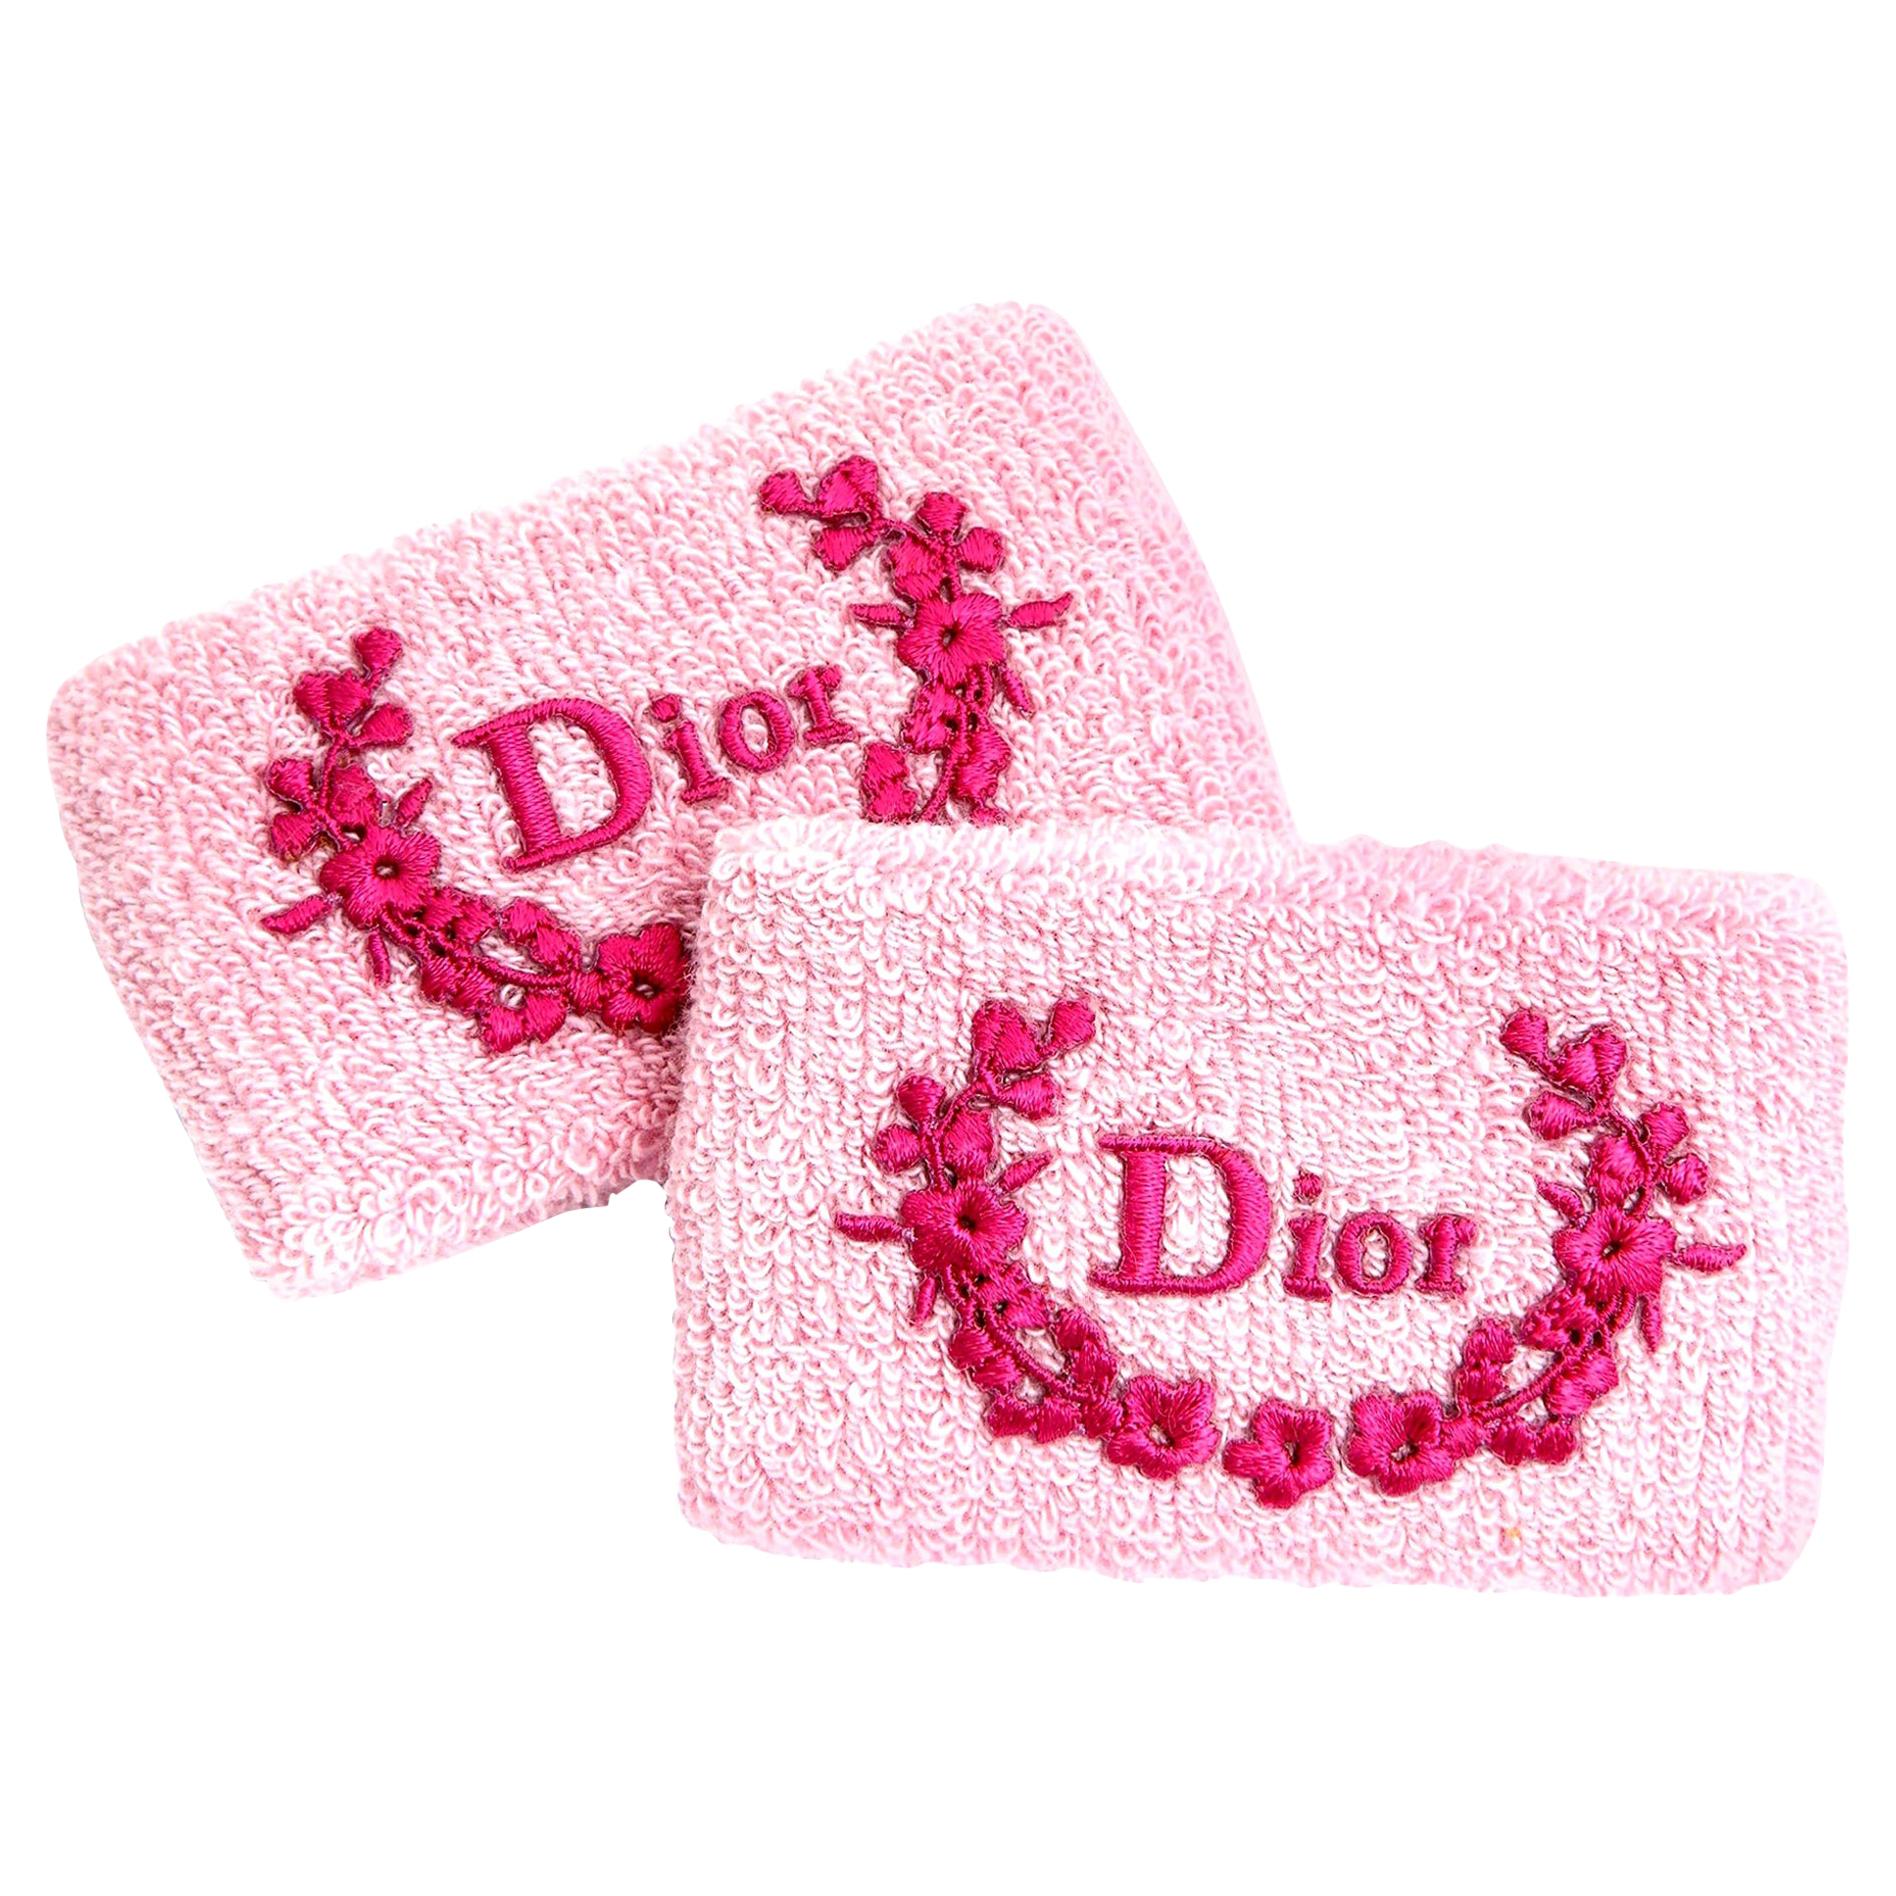 Christian Dior by John Galliano Pink Wrist Band For Sale